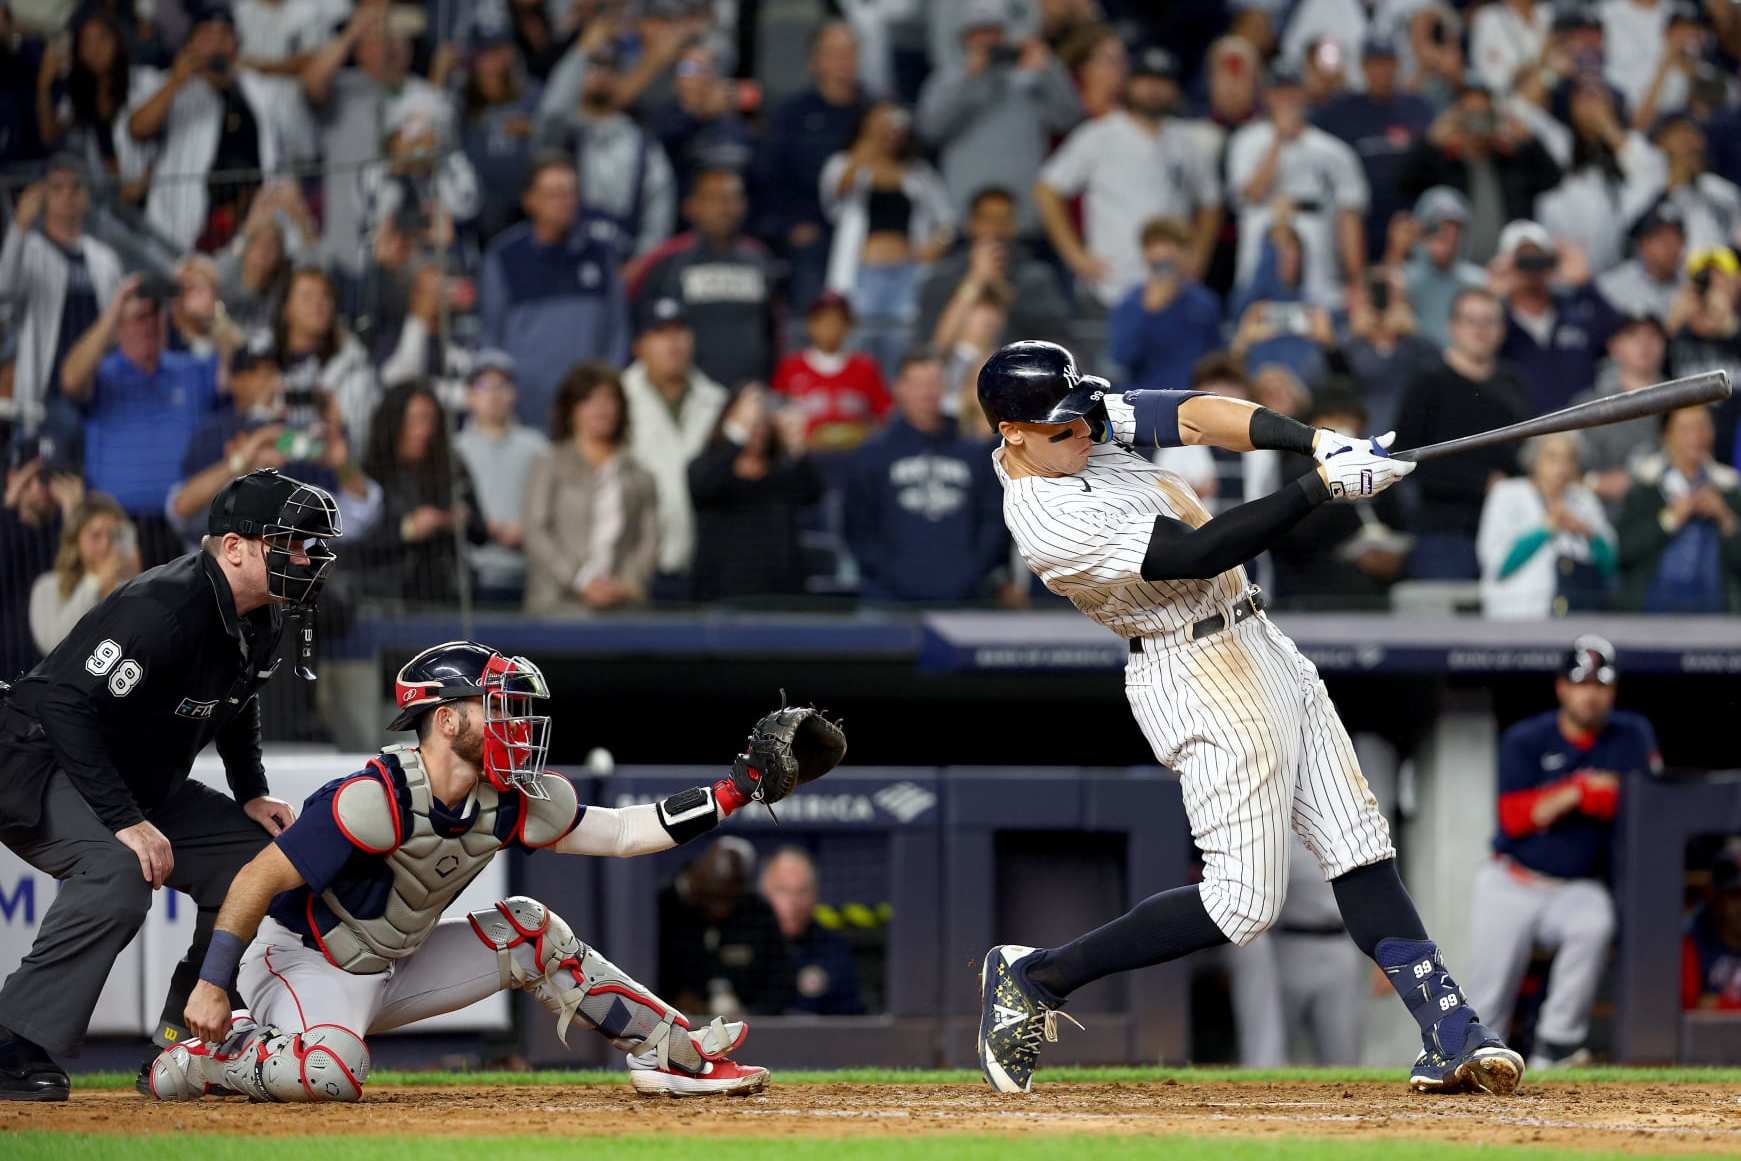 Ratings good for Yankees-Red Sox London Series - Sports Media Watch